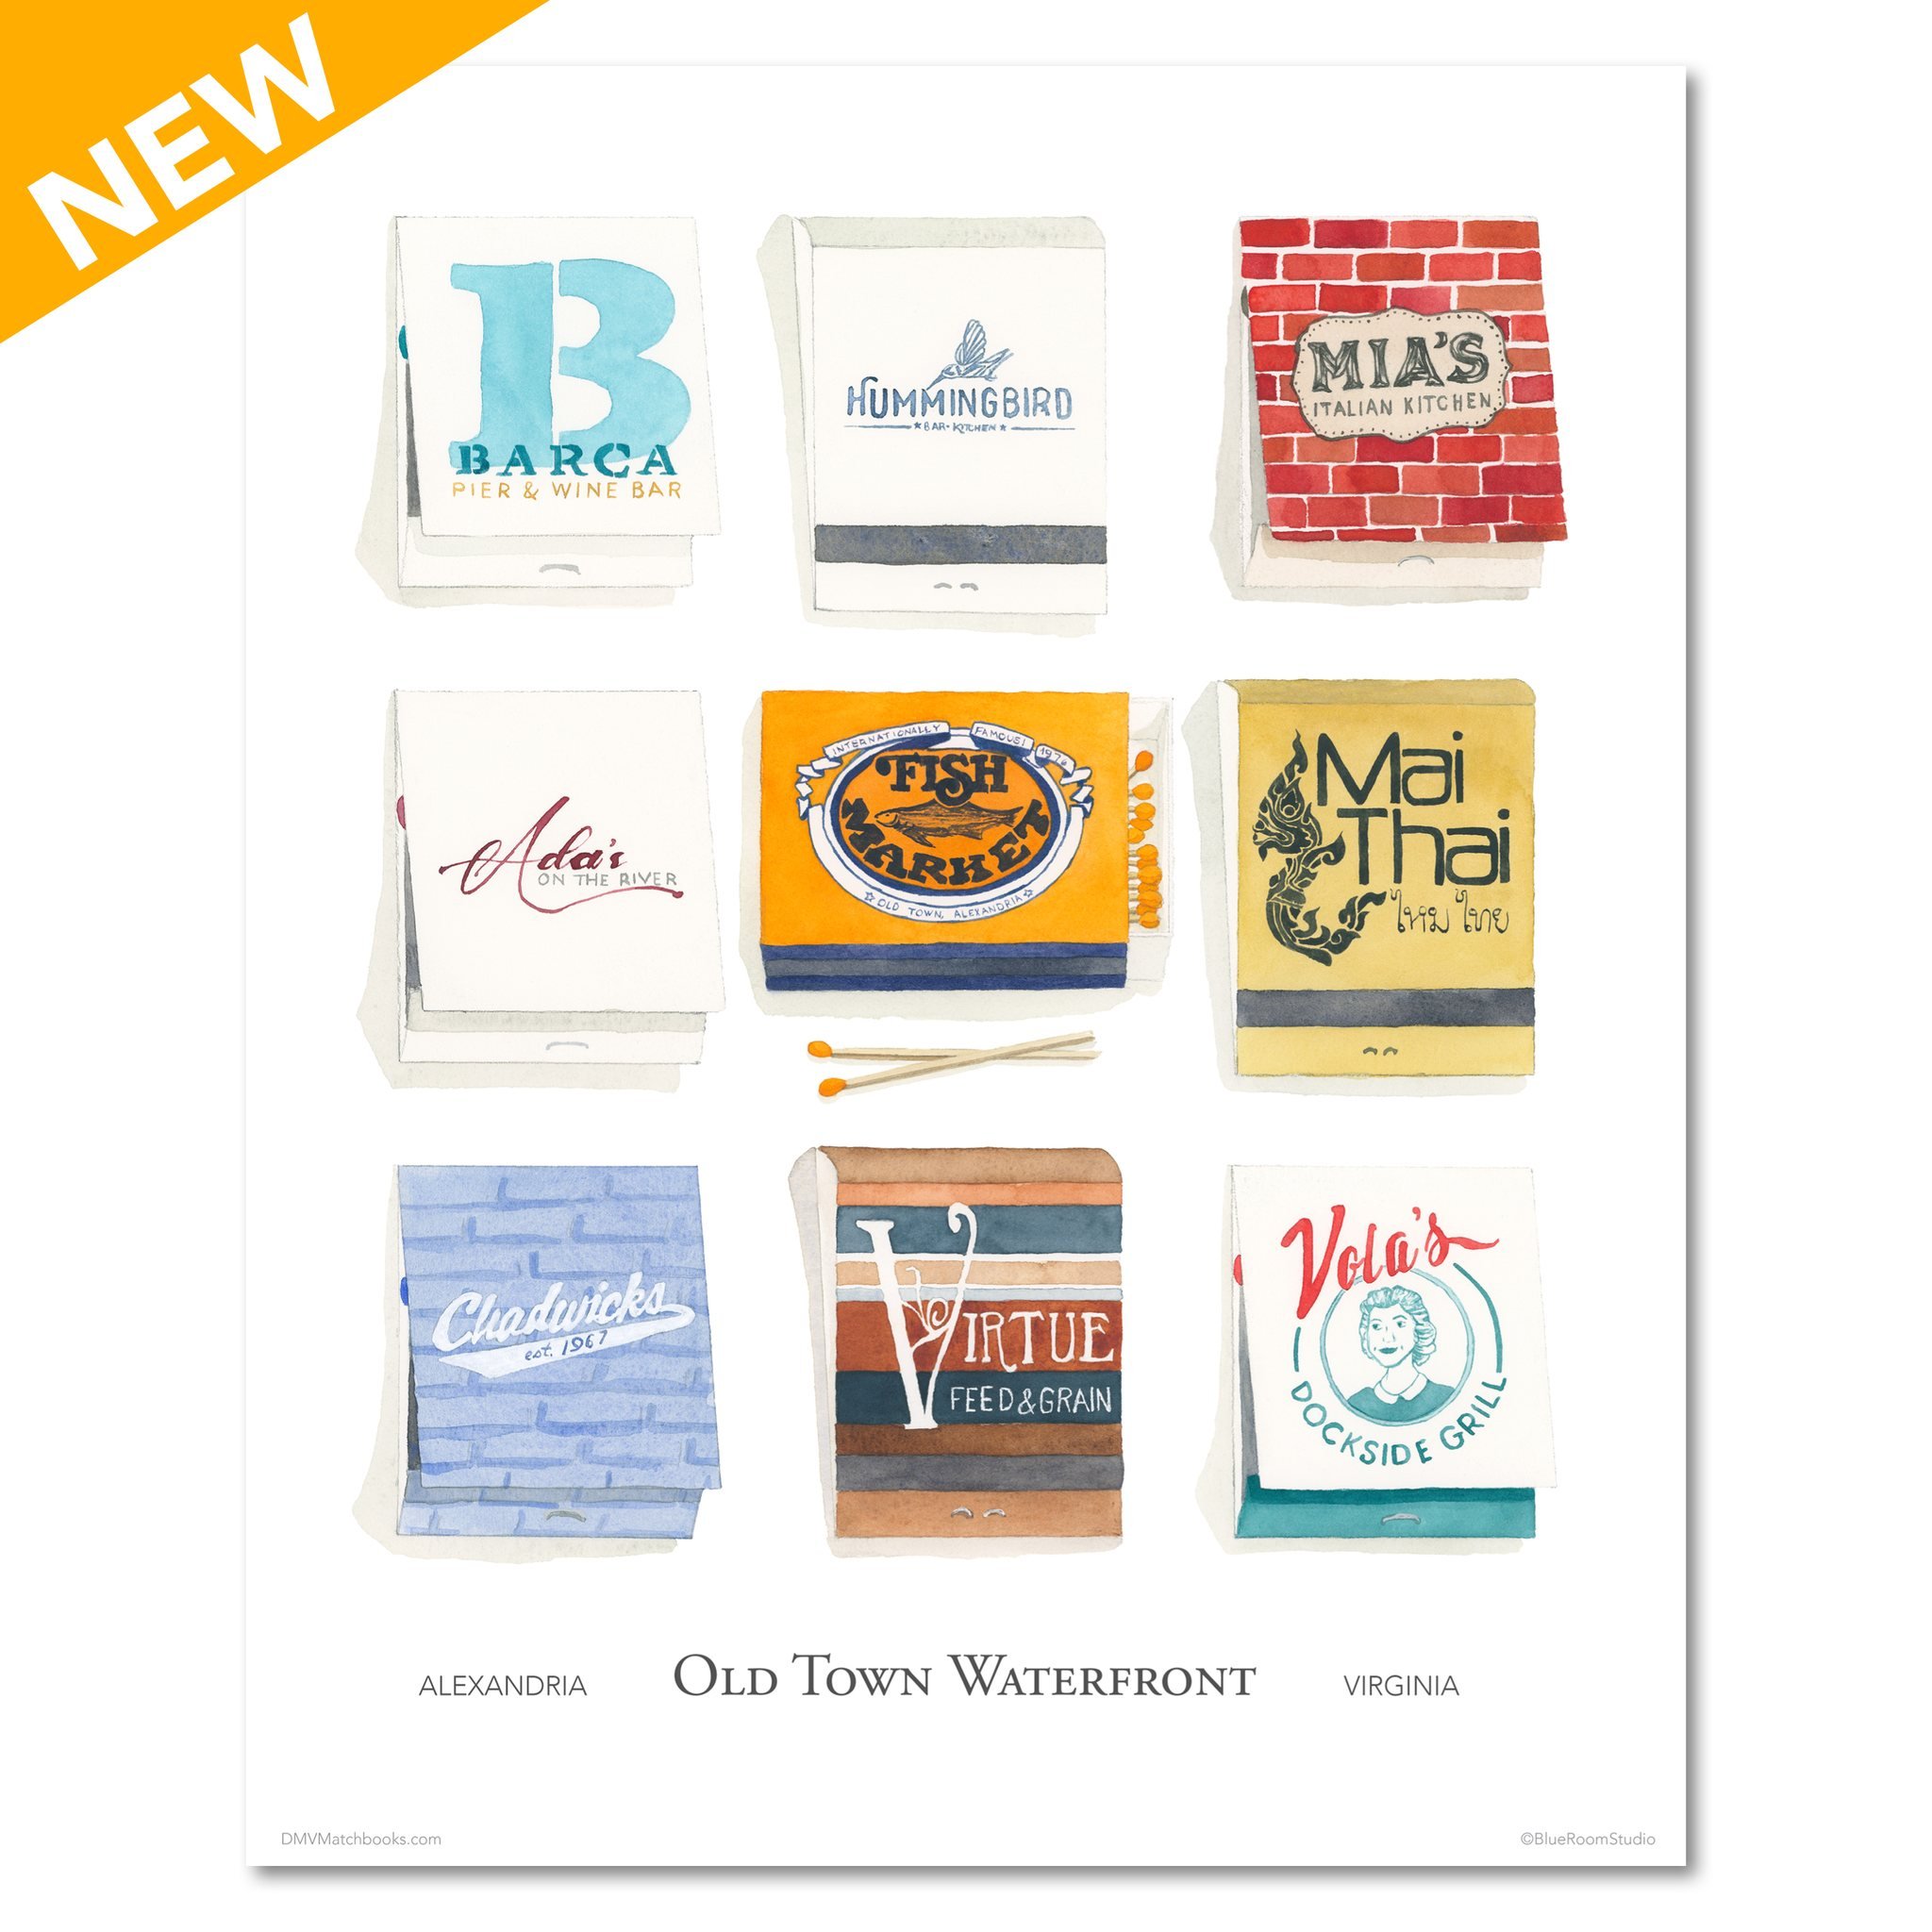 Cross-marketing for my @dmvmatchbooks  alter ego. I&rsquo;m very excited about this new print and wanted to share : )

I have been thinking about creating a new matchbook print showcasing Old Town Alexandria favorites for quite a while but deciding w